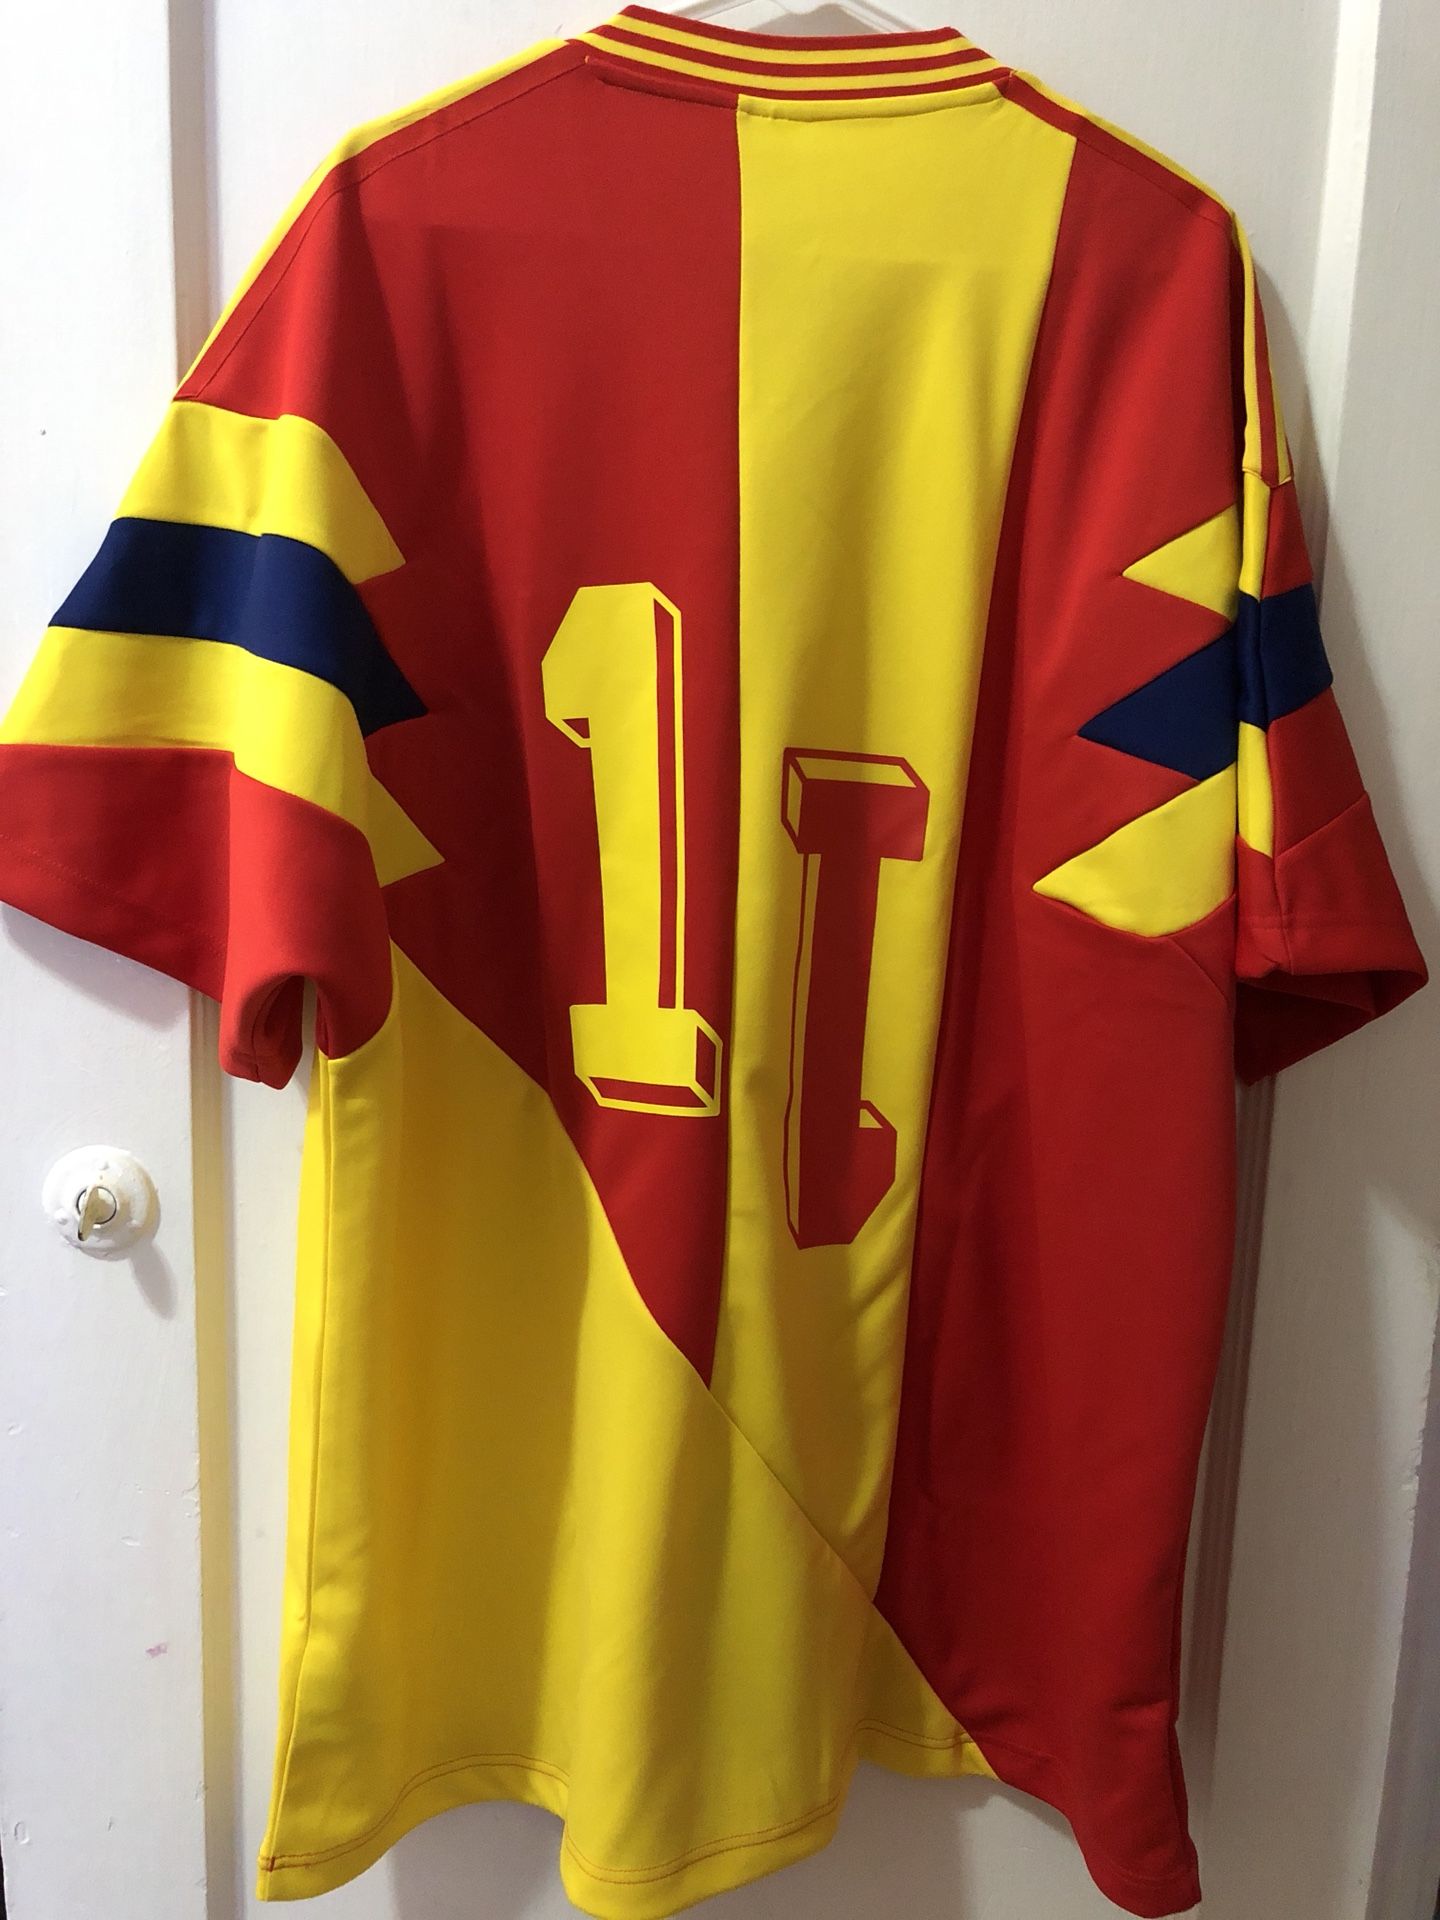 Colombia mash up jersey adidas XXL for Sale in Queens, NY - OfferUp